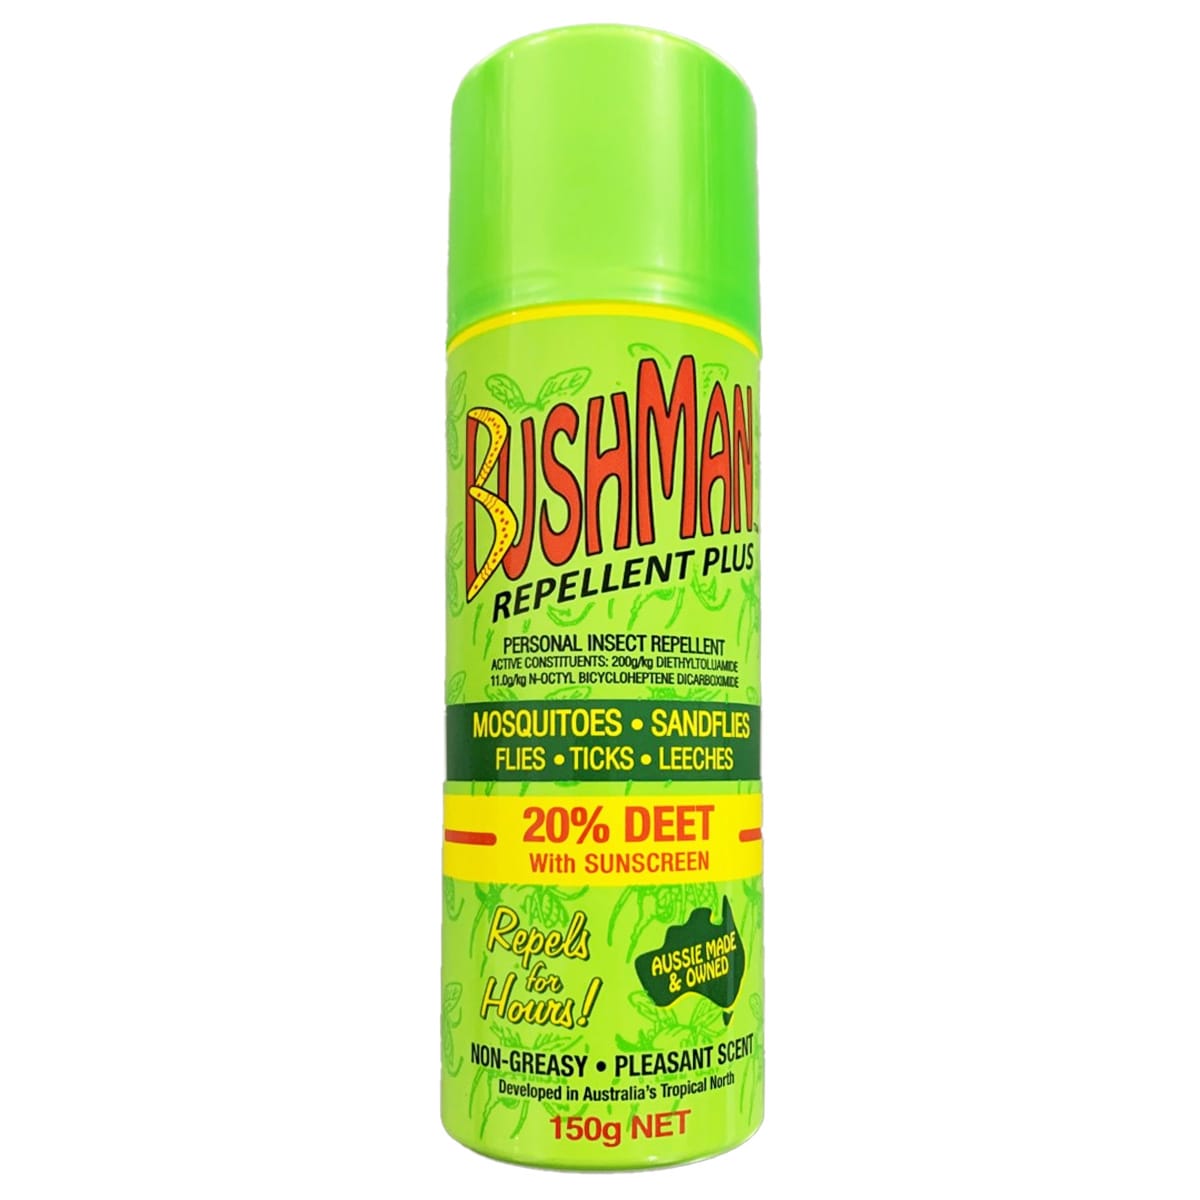 Bushman Plus 20% Deet Insect Repellent with Sunscreen Spray 150g